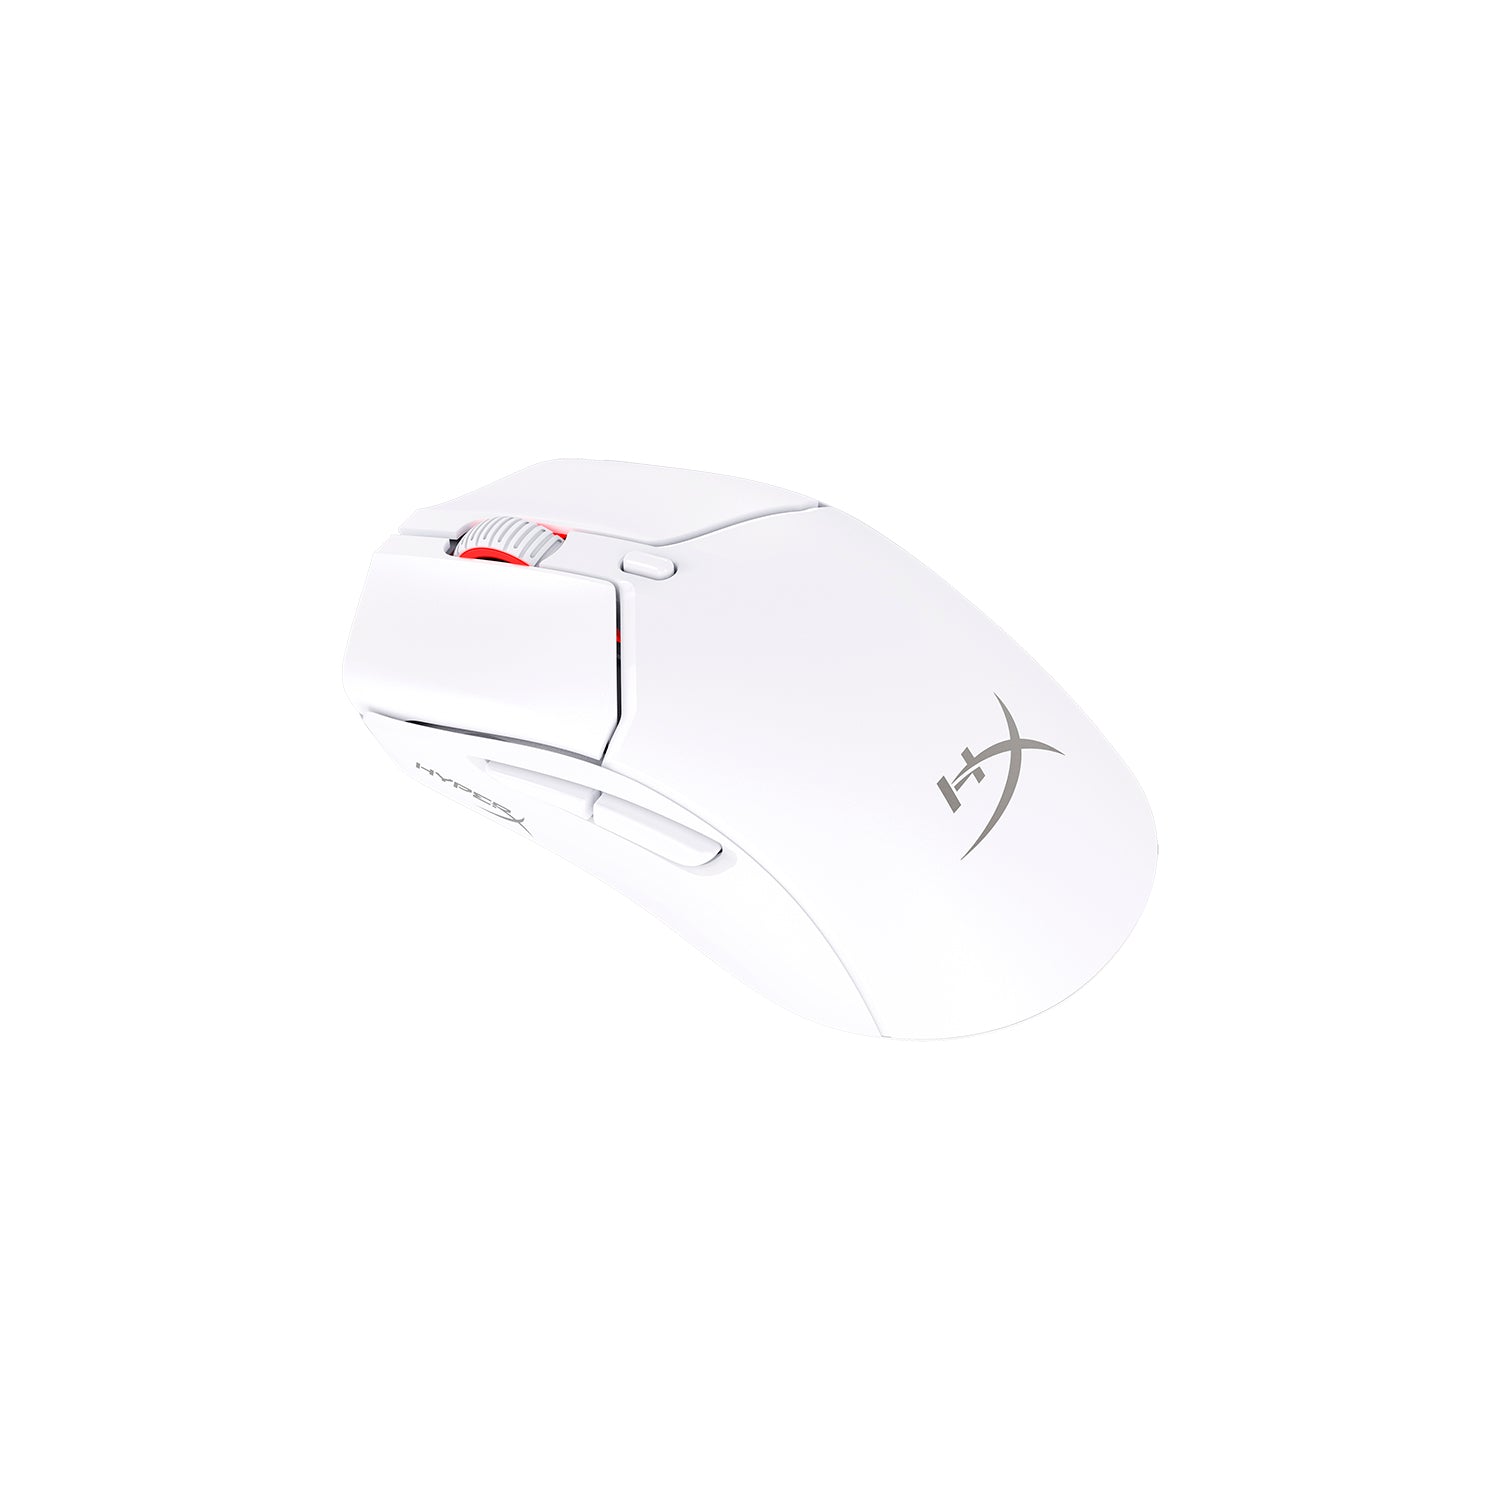 HyperX Pulsefire Haste 2 Mini Wireless White Gaming Mouse - angled view pointing to the left side